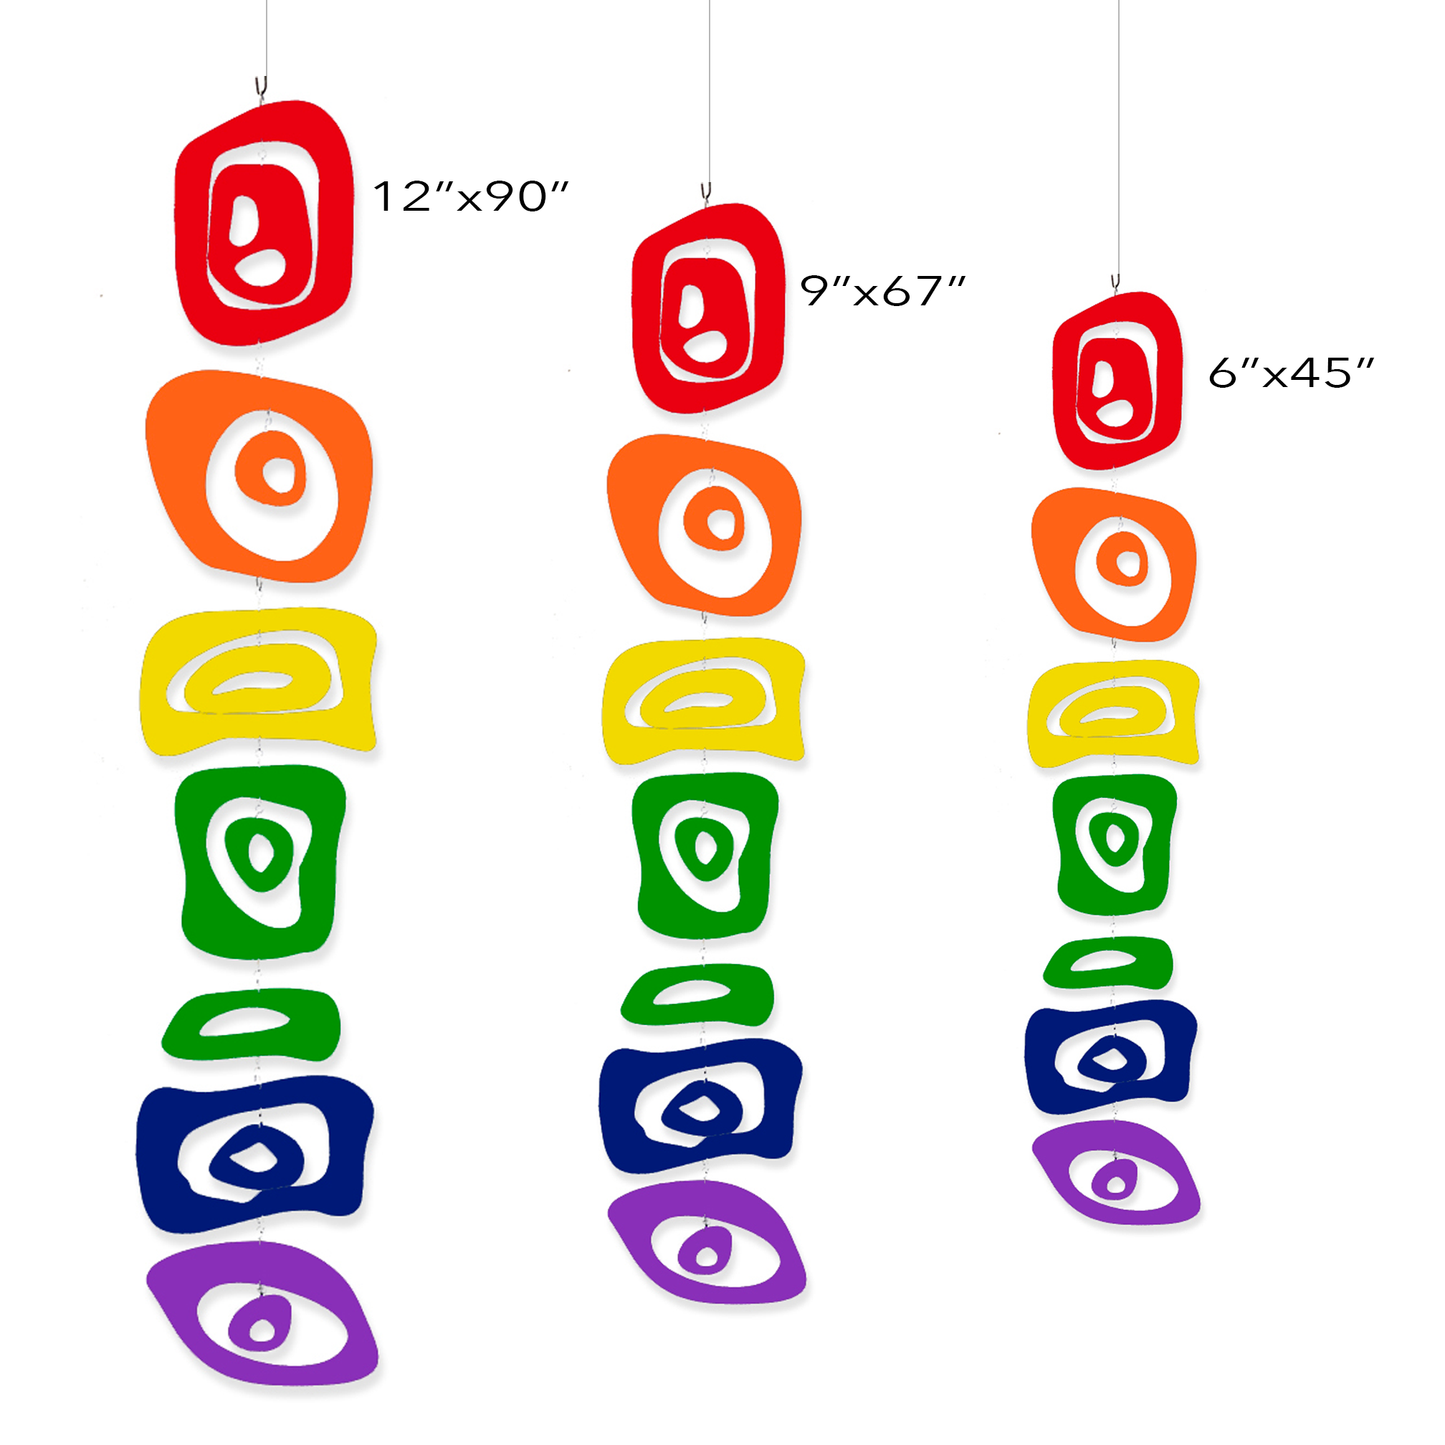 LGBTQ Rainbow Pride Vertical Hanging Art Mobiles in 3 sizes by AtomicMobiles.com